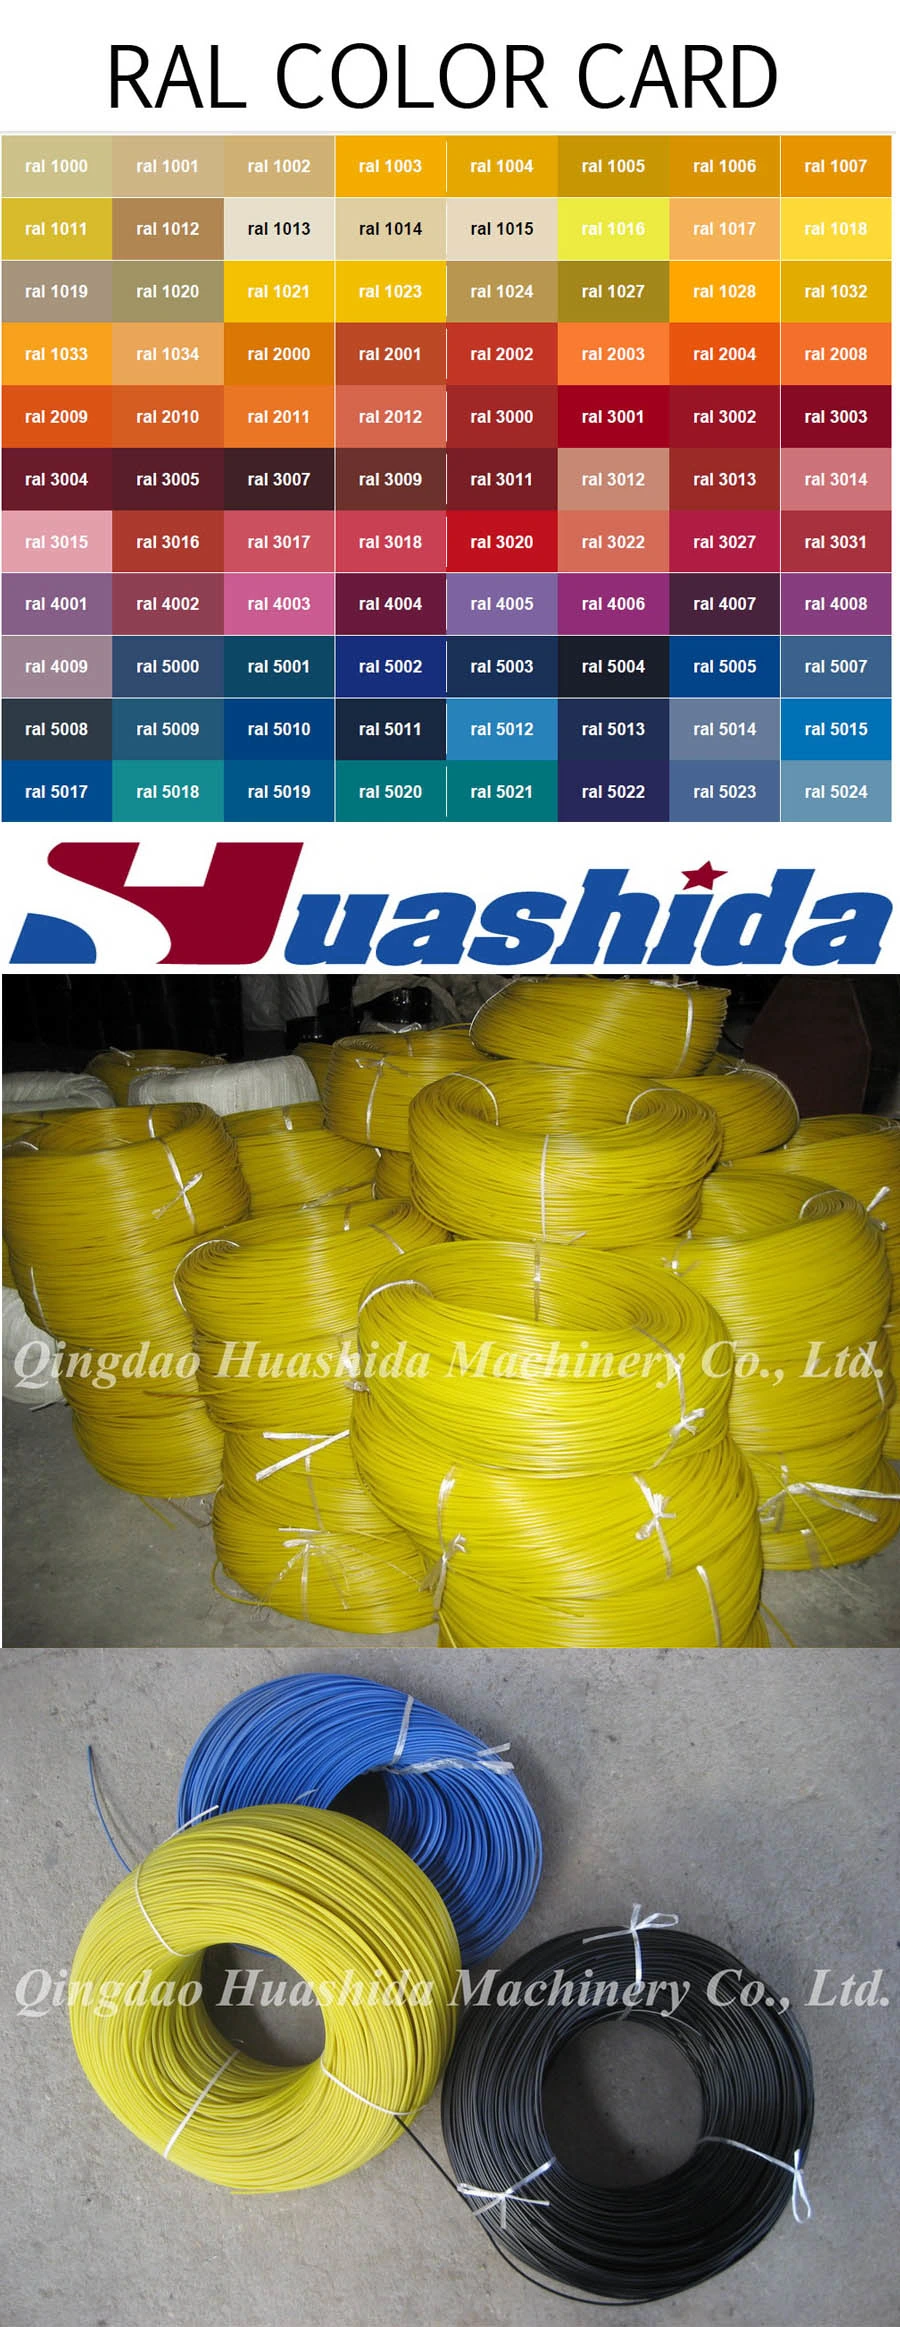 Plastic Welding Rods for HDPE/PP Metal Reinforced Pipe Joint Sealing